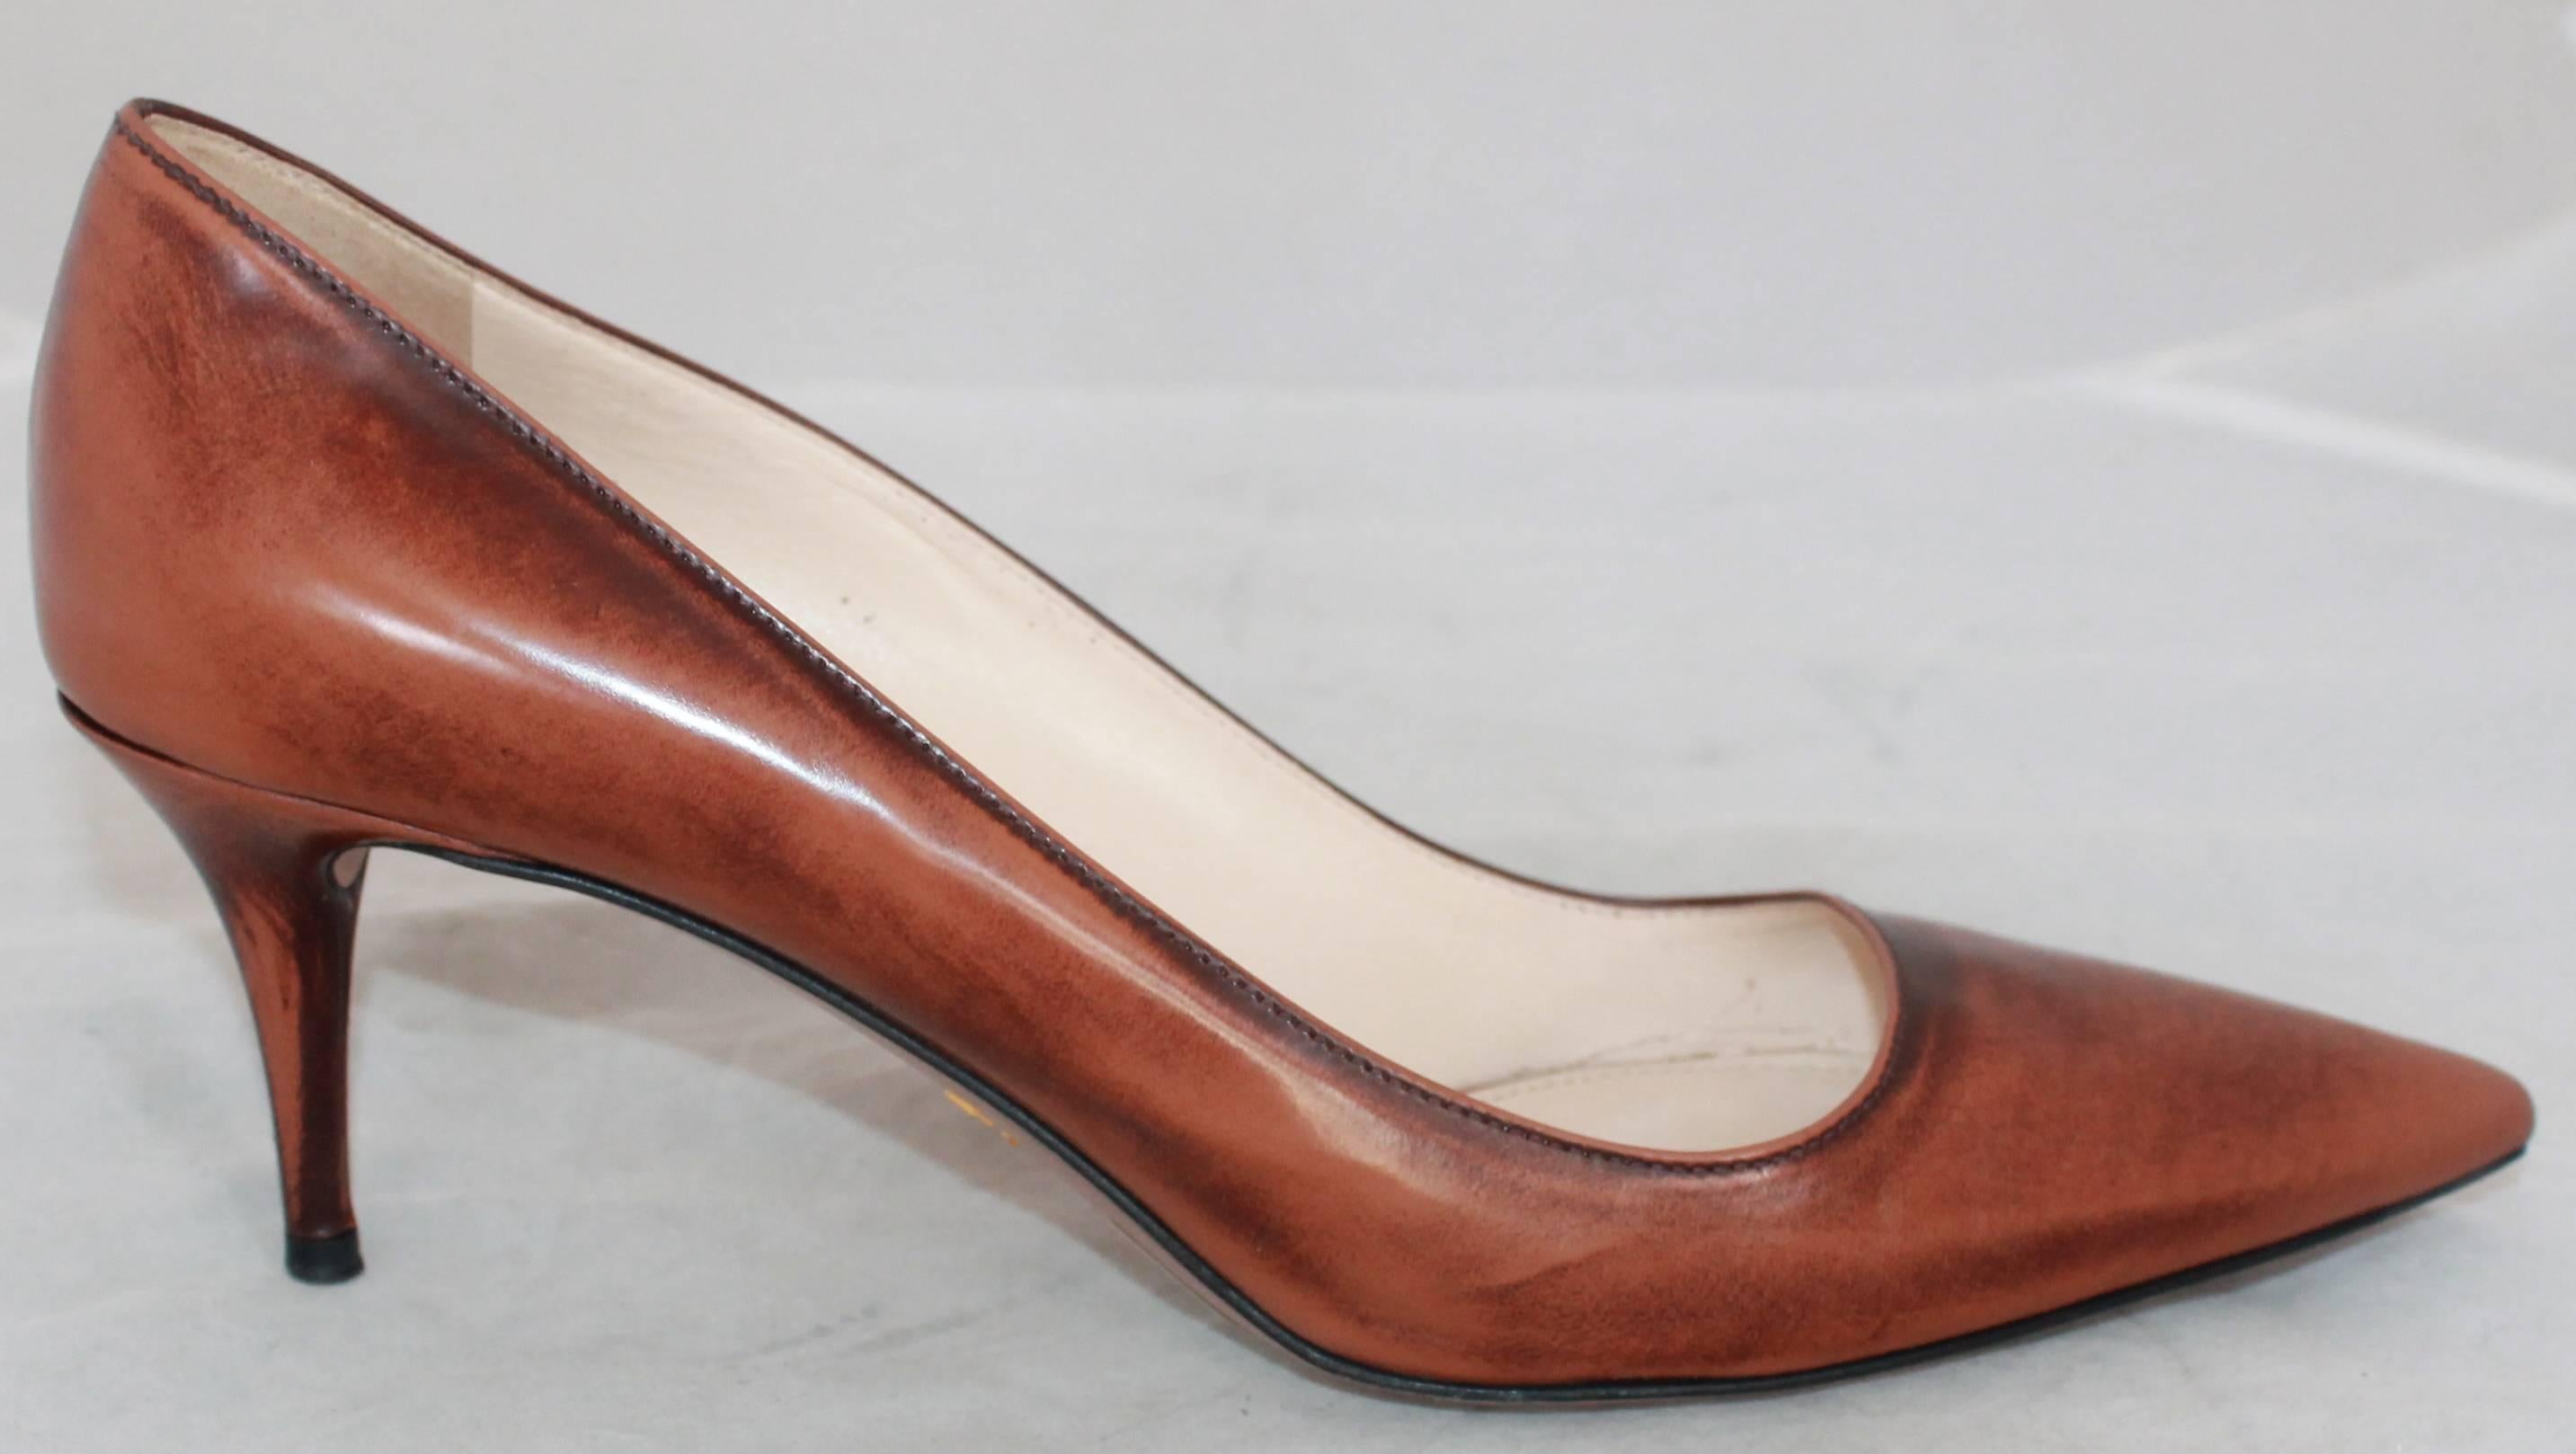 Prada Brown Unfinished Patent Pointed Toe Low Heels - 41.  These shoes are in good condition with noticeable wear on the bottom and slight scuffing on the heel and the points of the toes.  They feature lighter and darker areas on the heels and